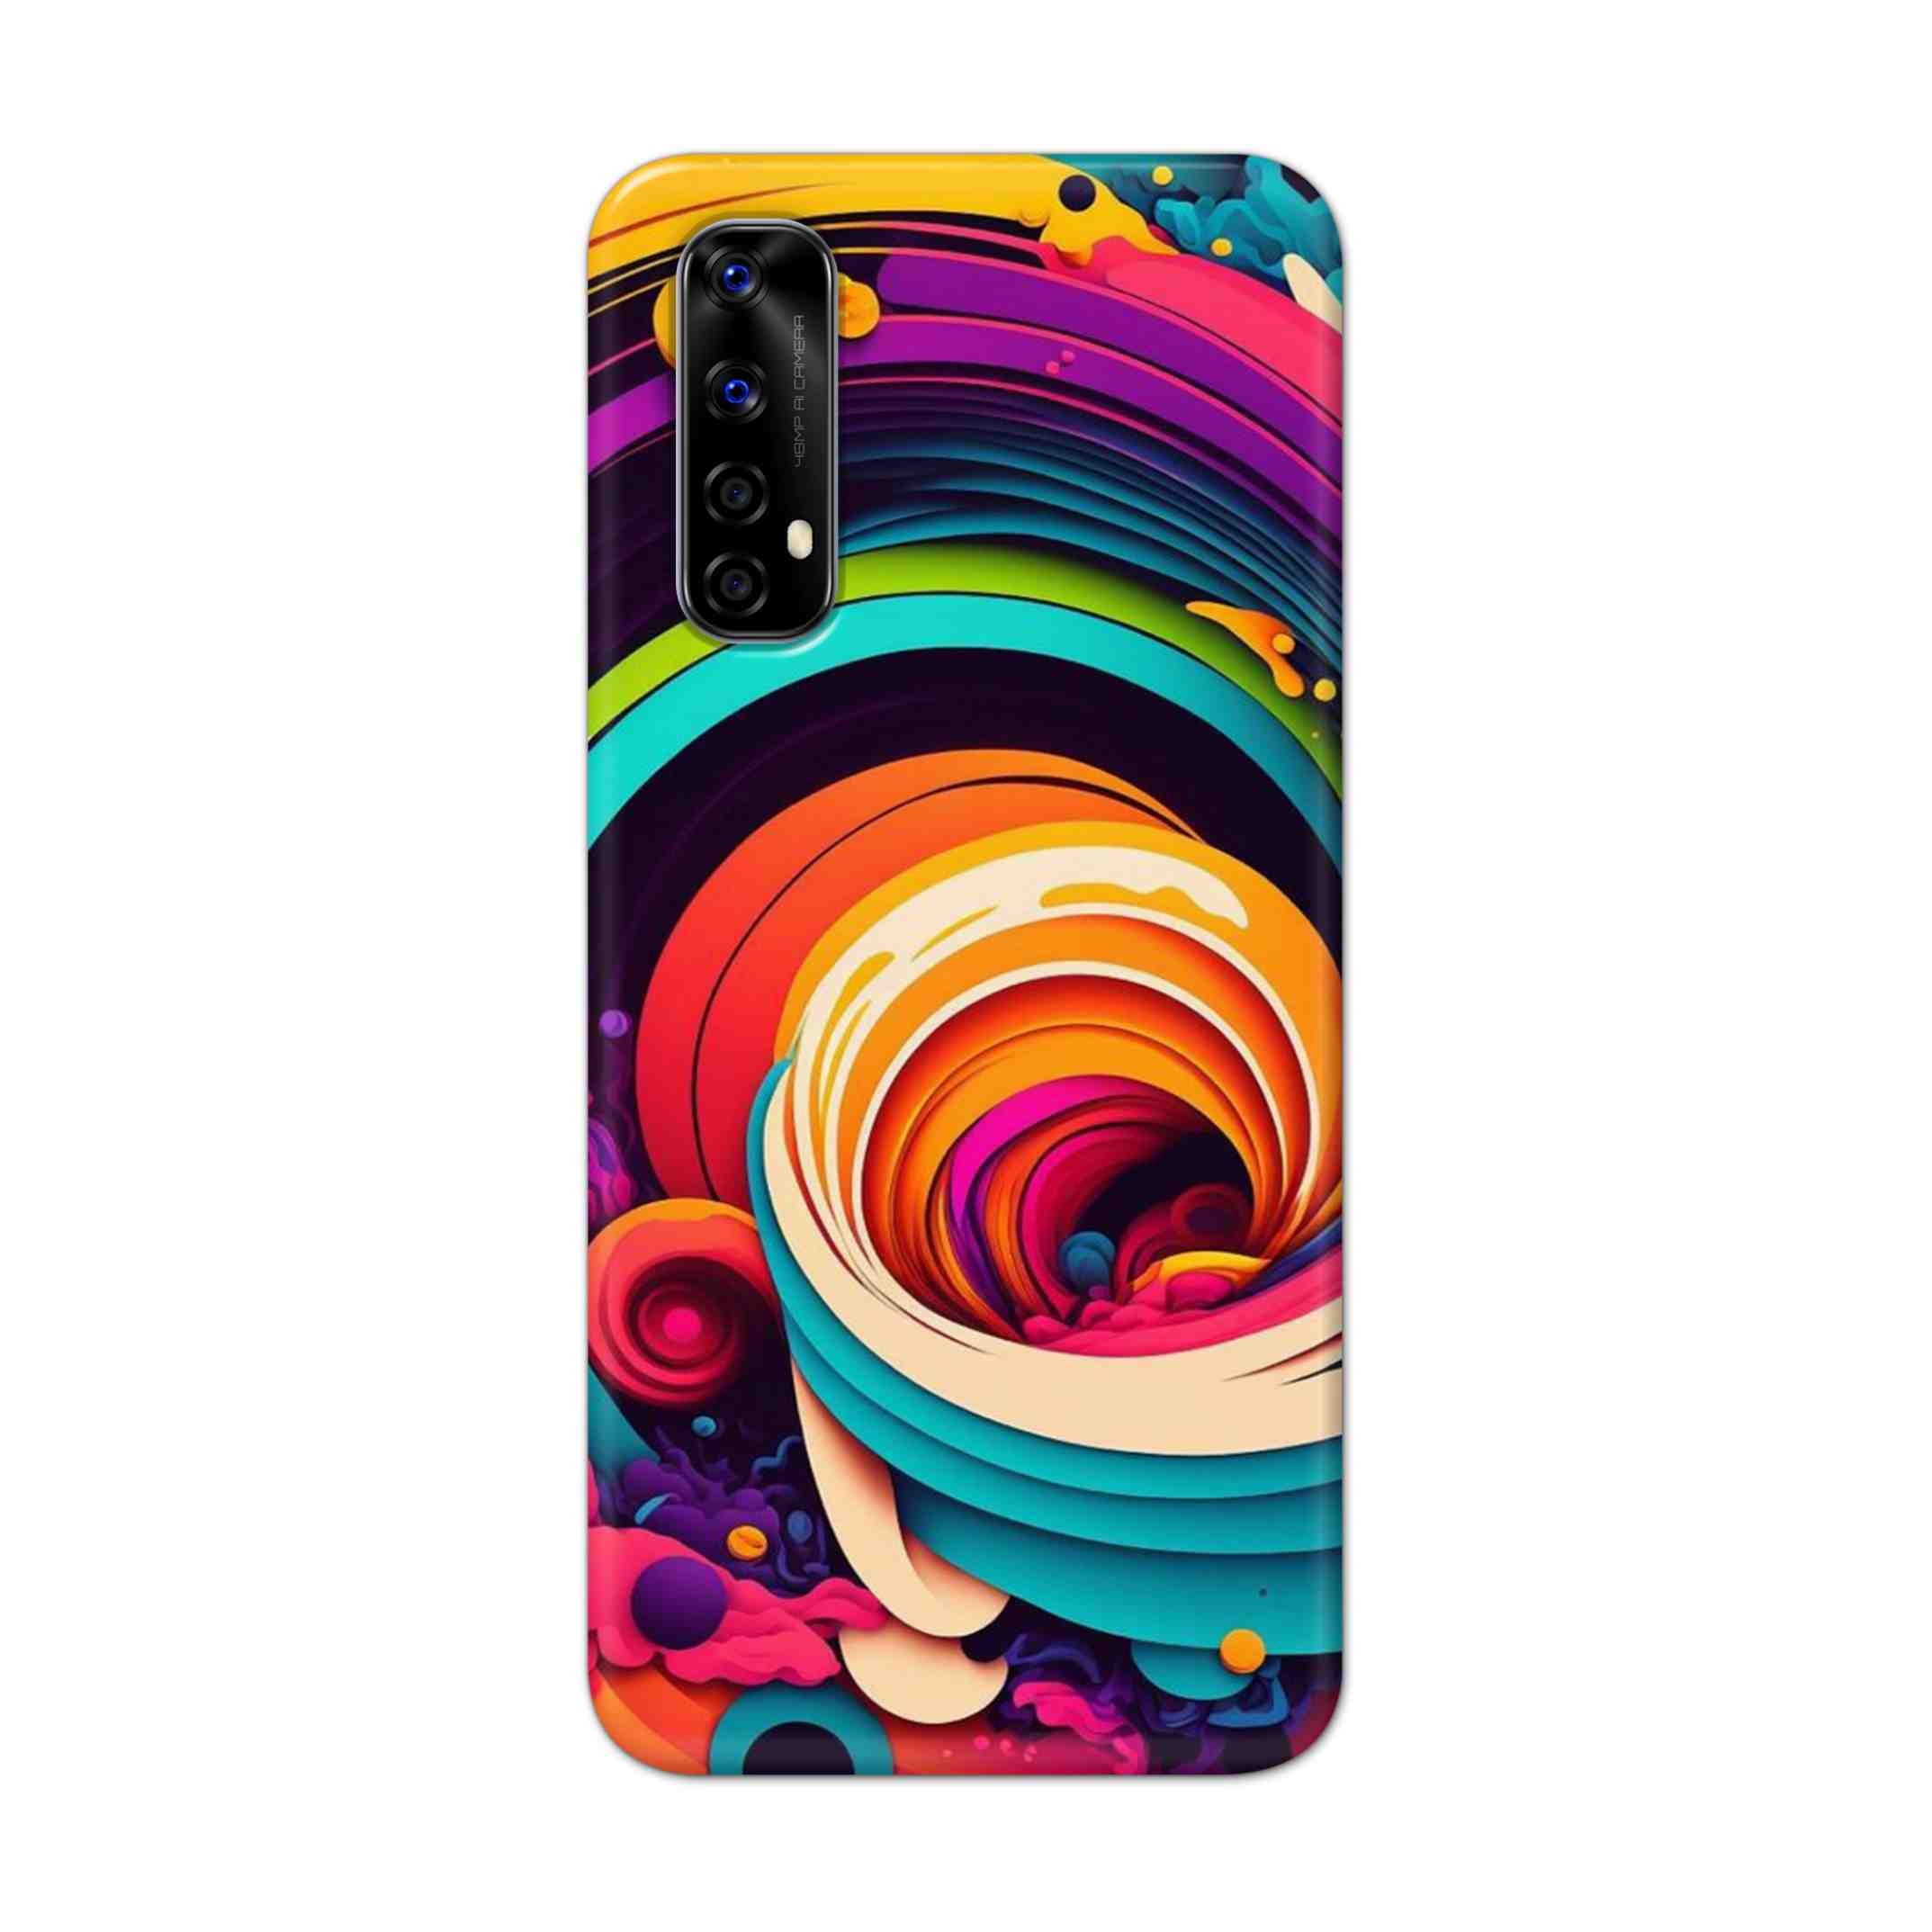 Buy Colour Circle Hard Back Mobile Phone Case Cover For Realme Narzo 20 Pro Online